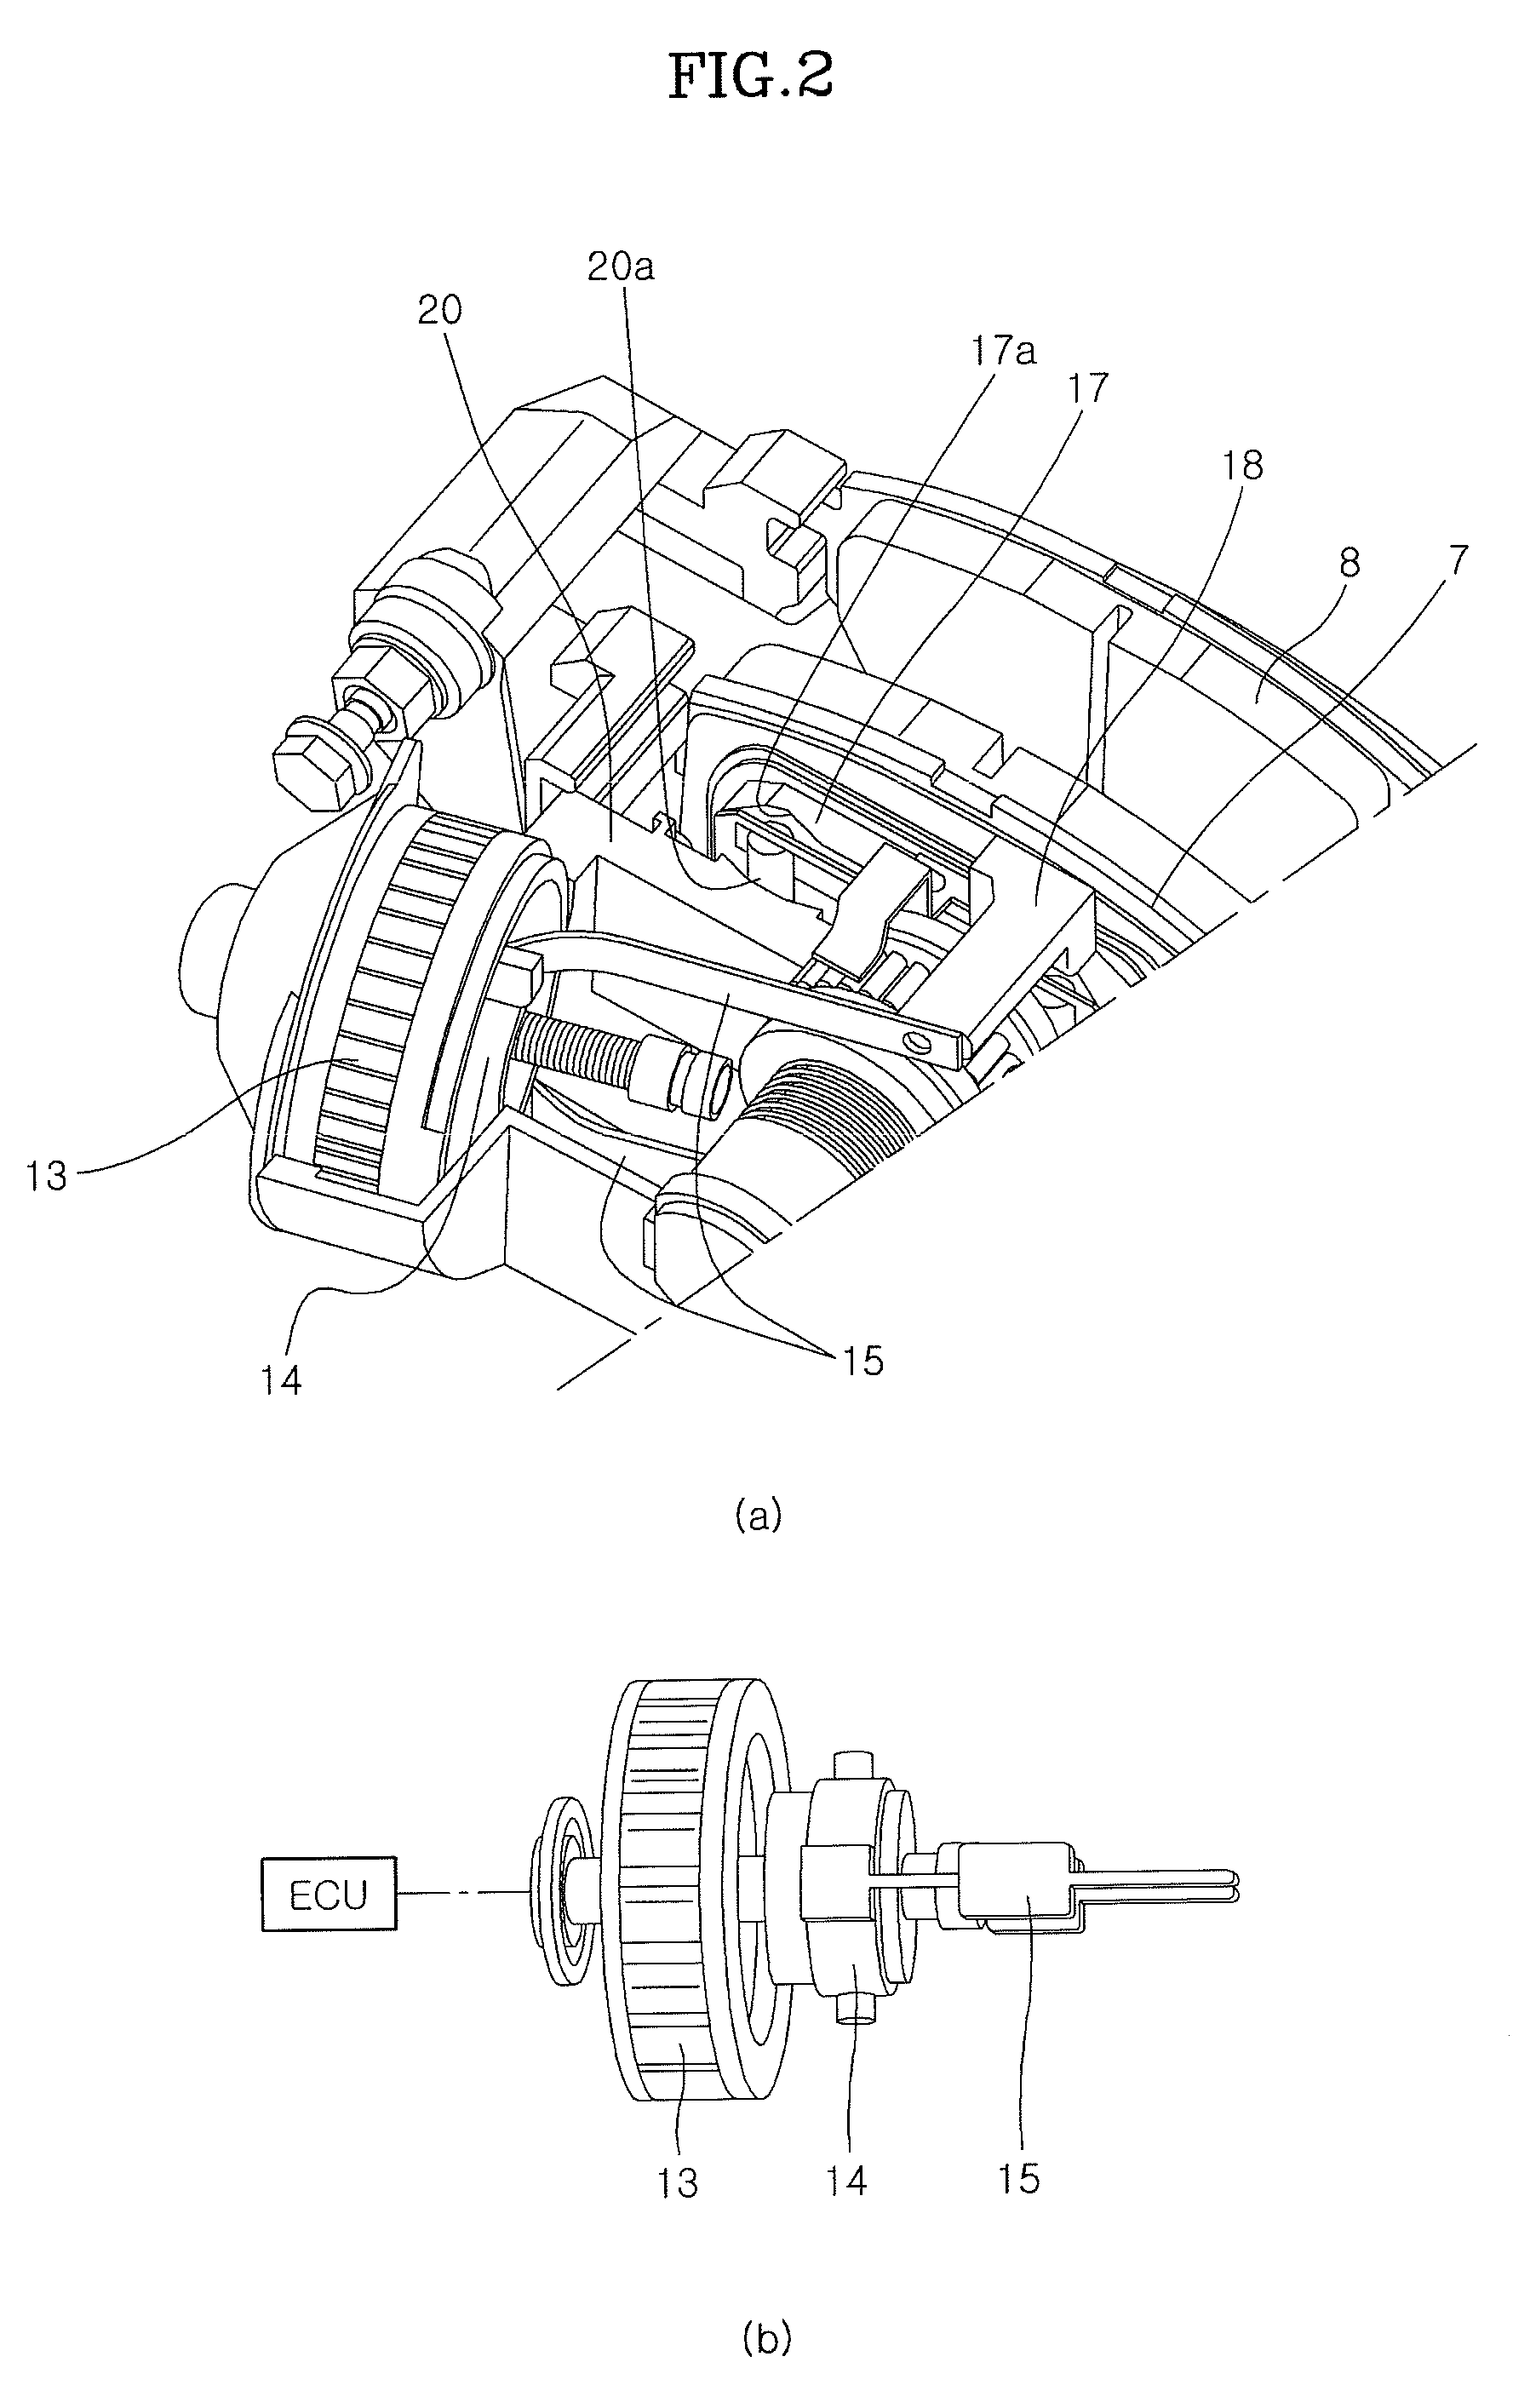 Single motor electro wedge brake system using solenoid mechanism for implementing additional functions